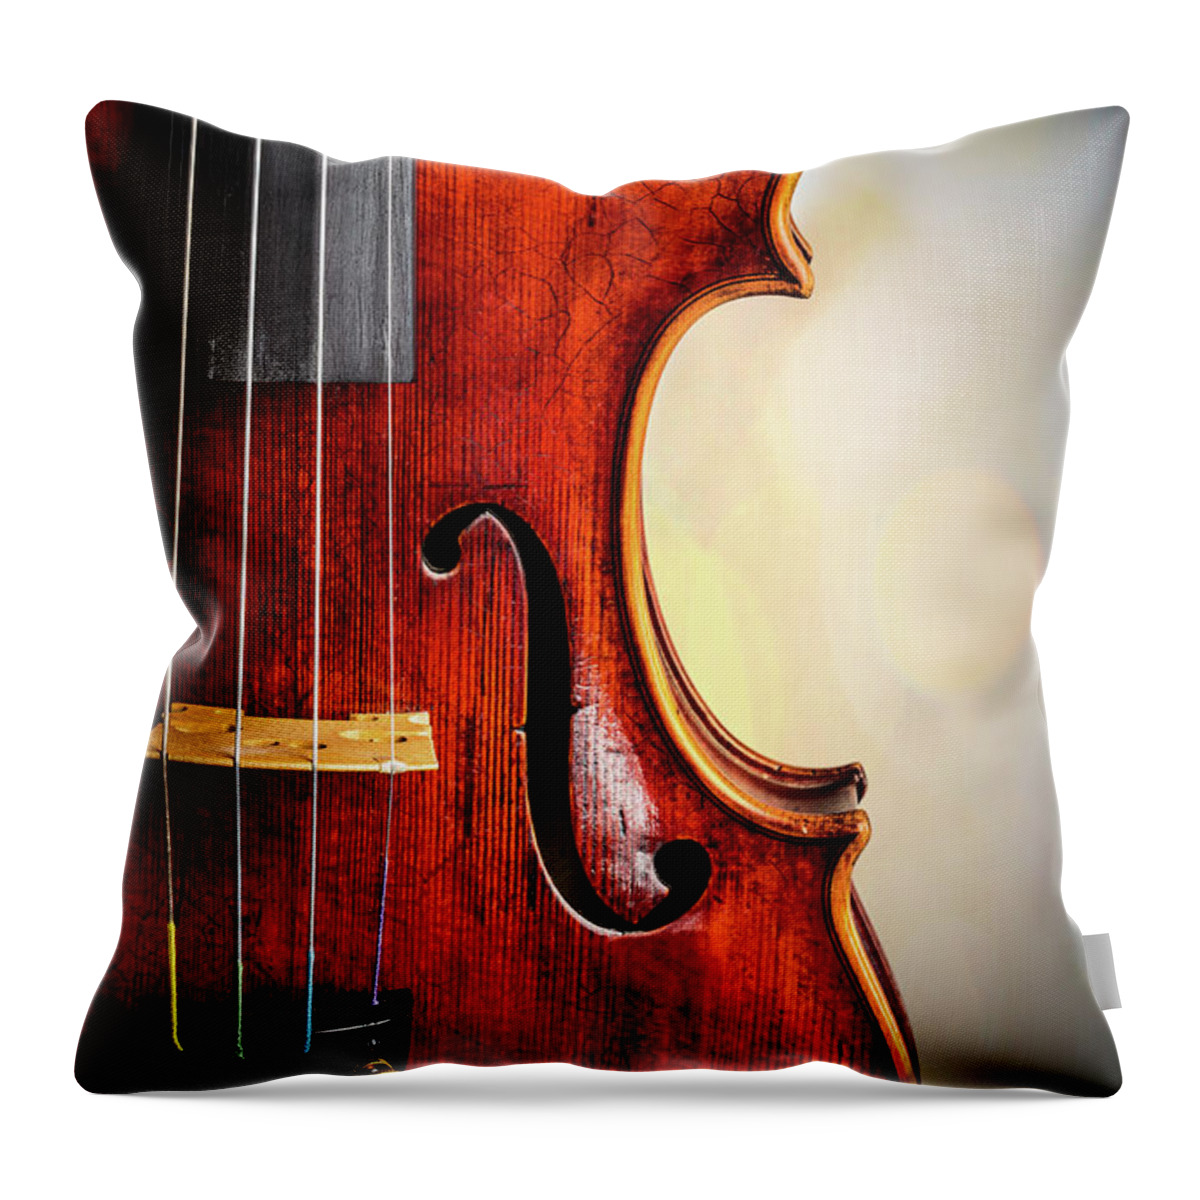 Violin Throw Pillow featuring the photograph Antique Violin 1732.23 by M K Miller